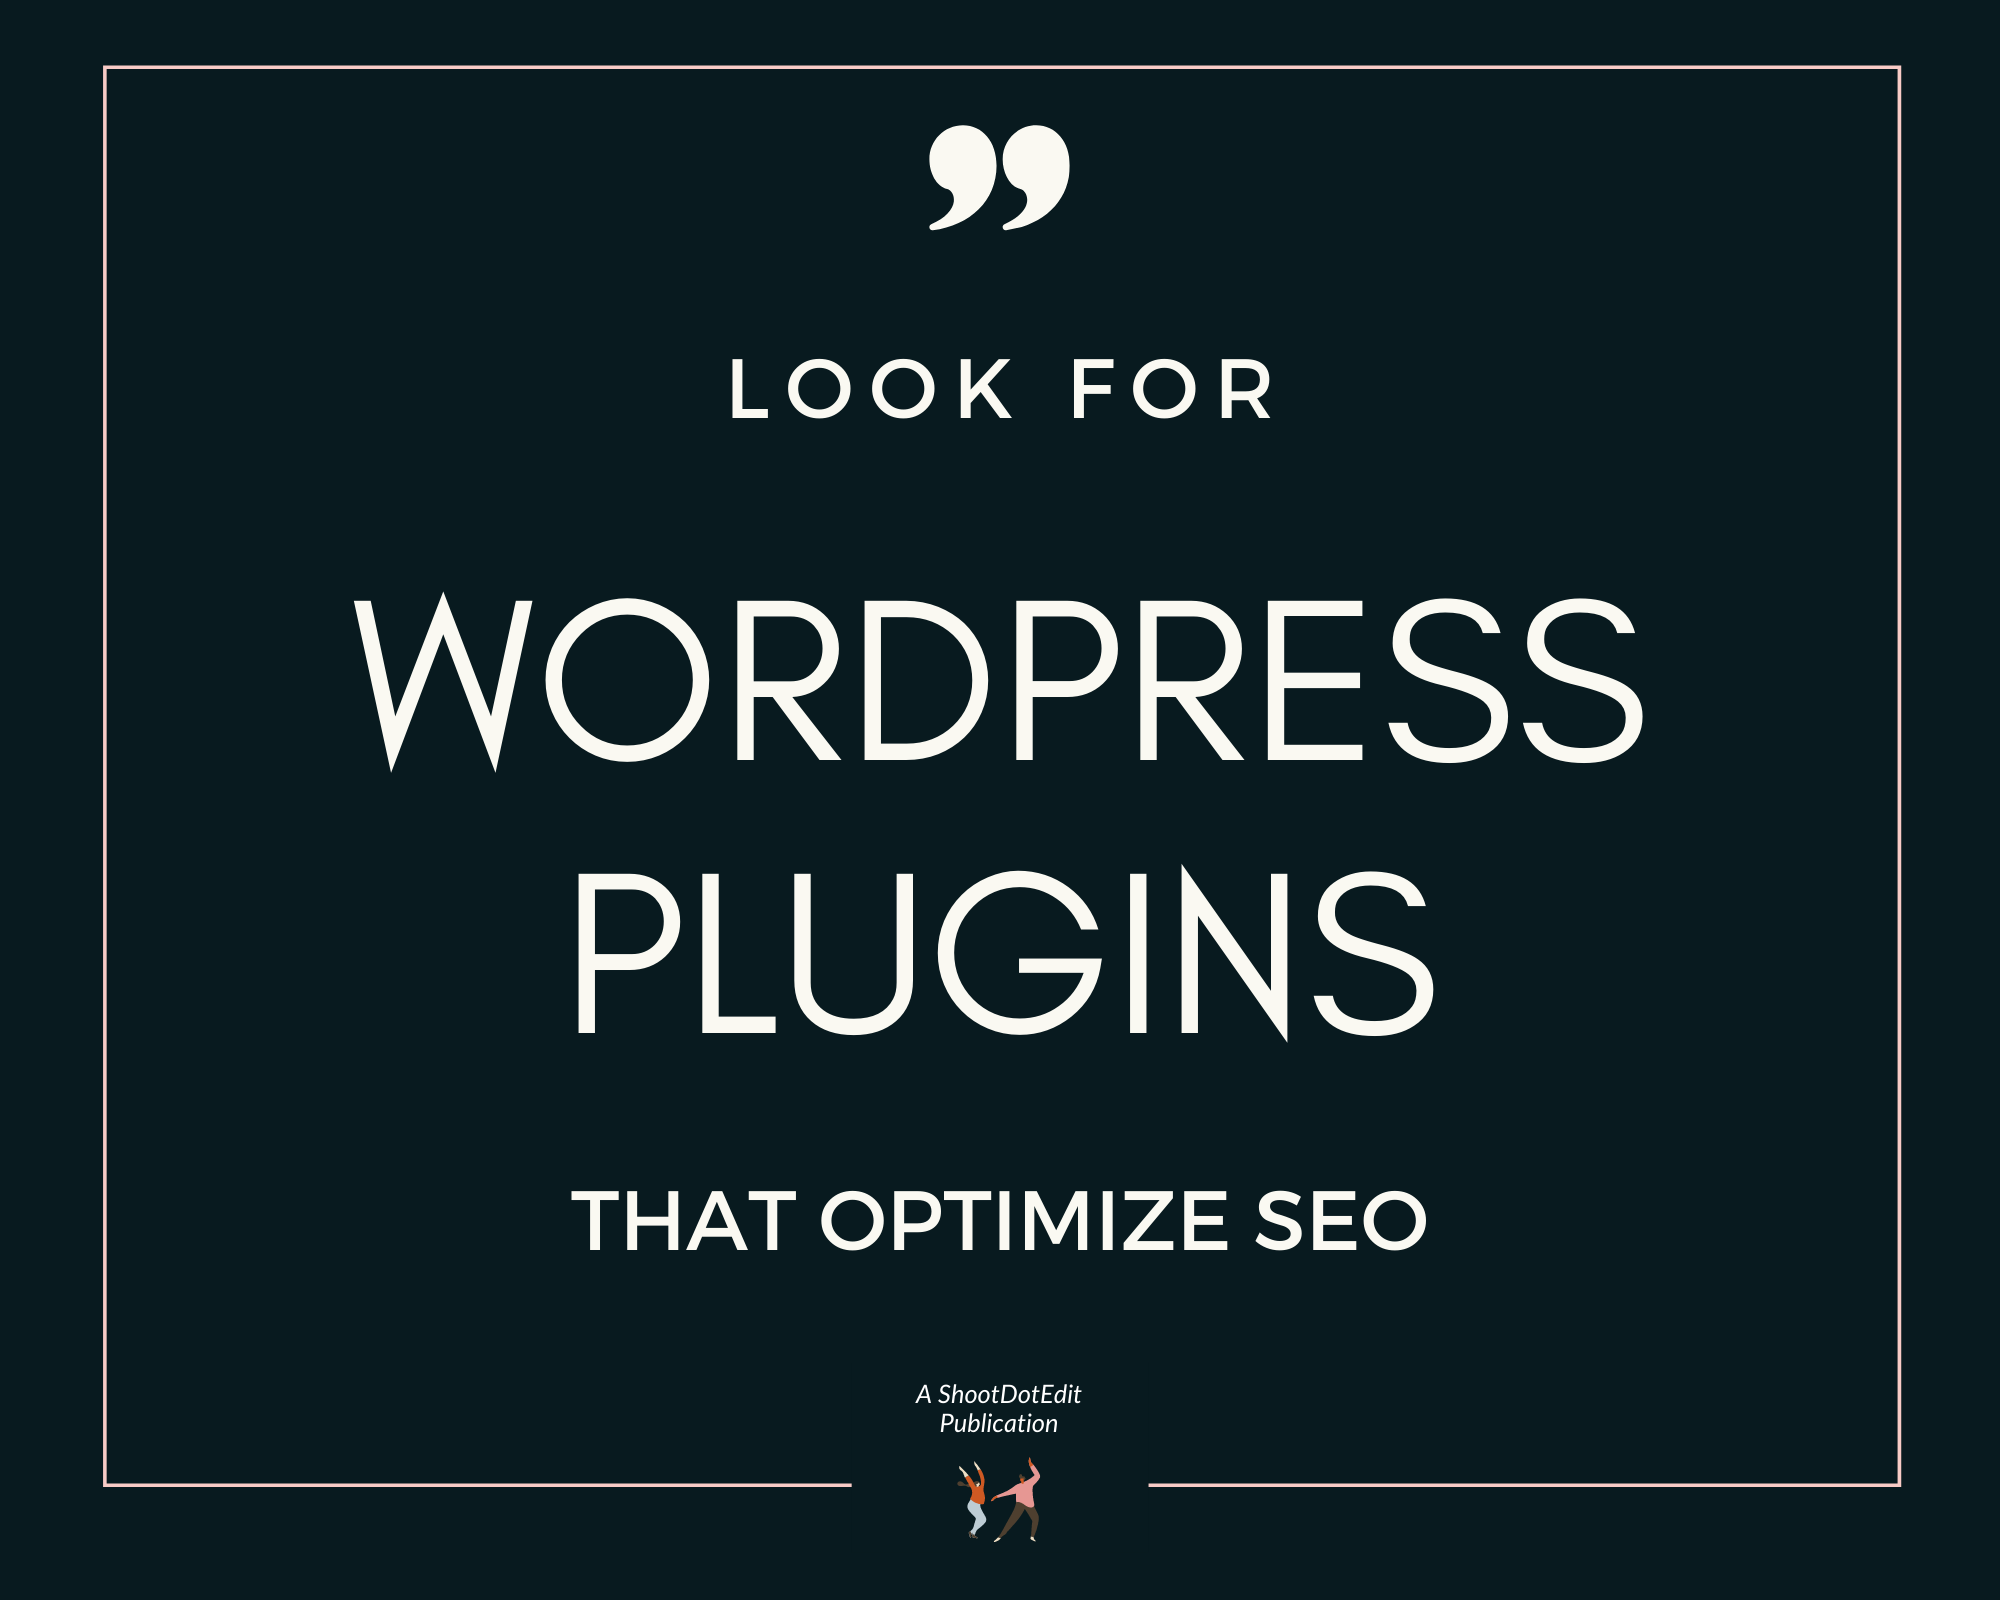 Infographic stating look for WordPress plugins that optimize SEO